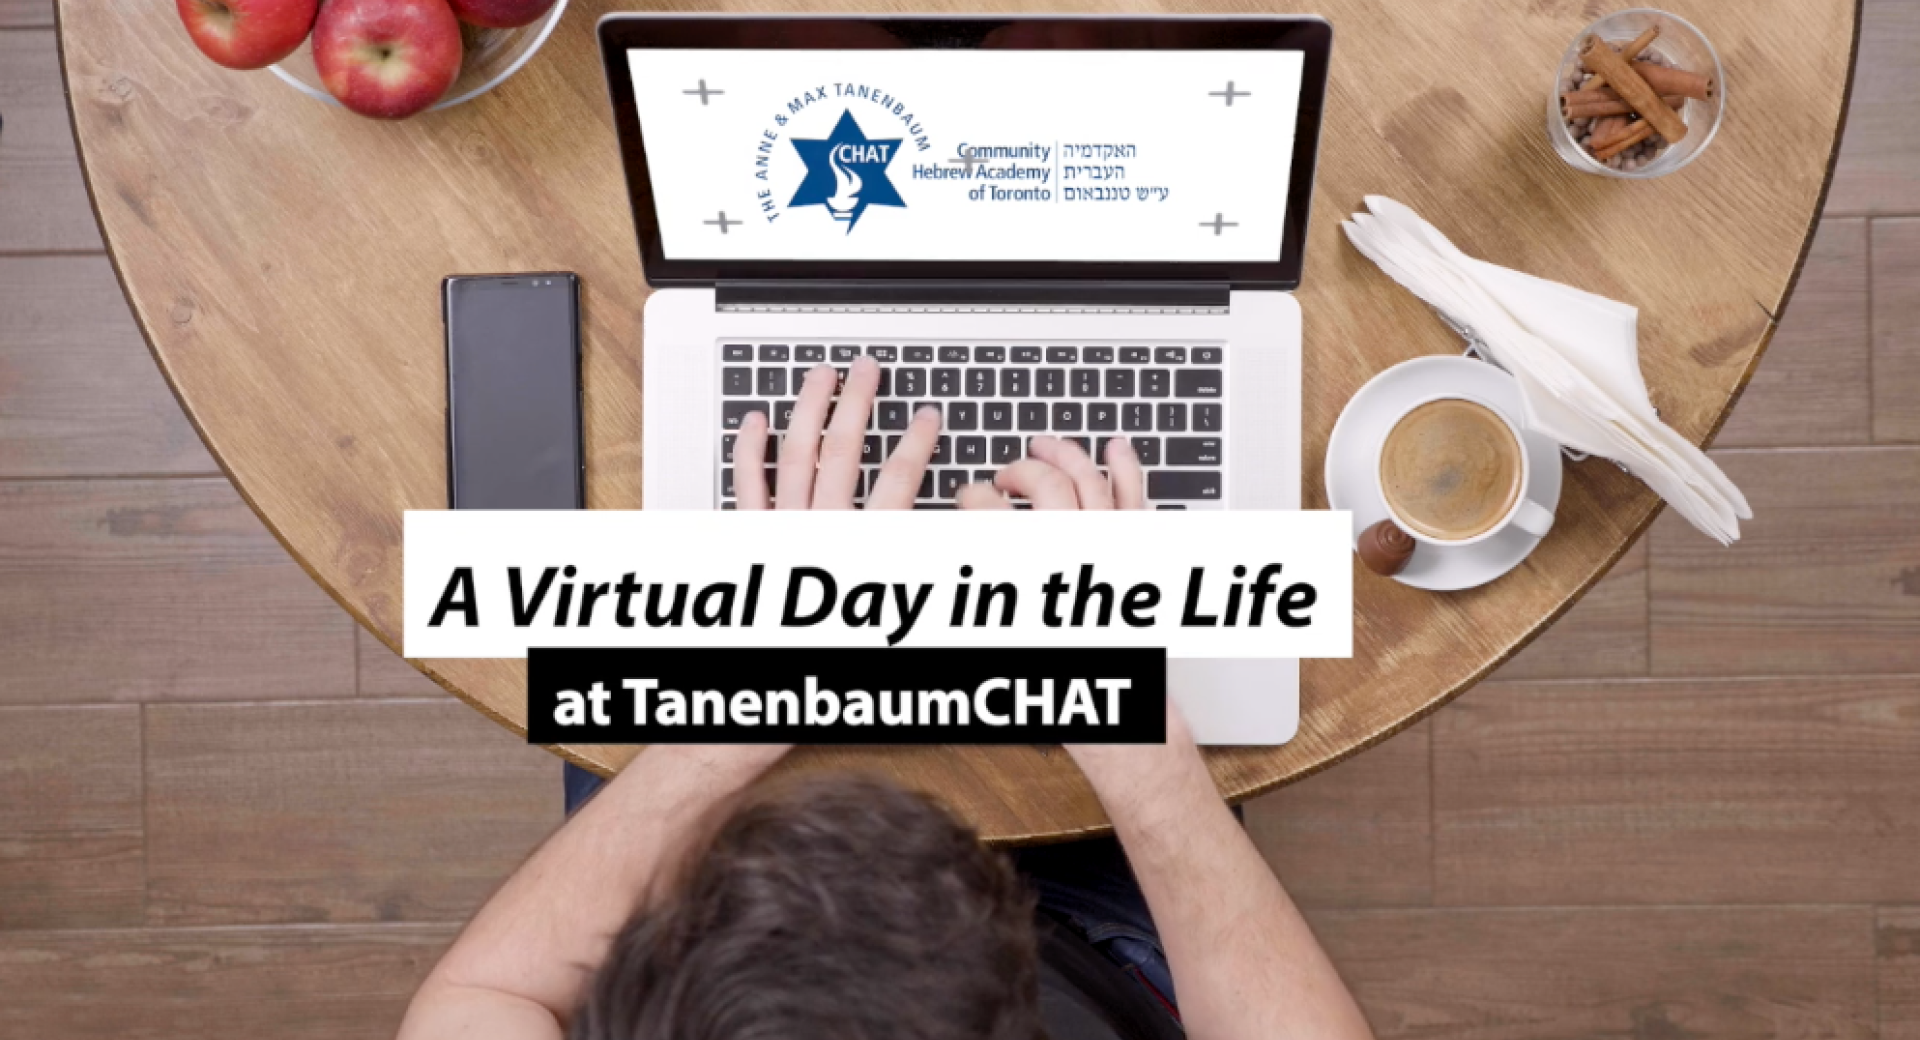 A Virtual Day in the Life at TanenbaumCHAT